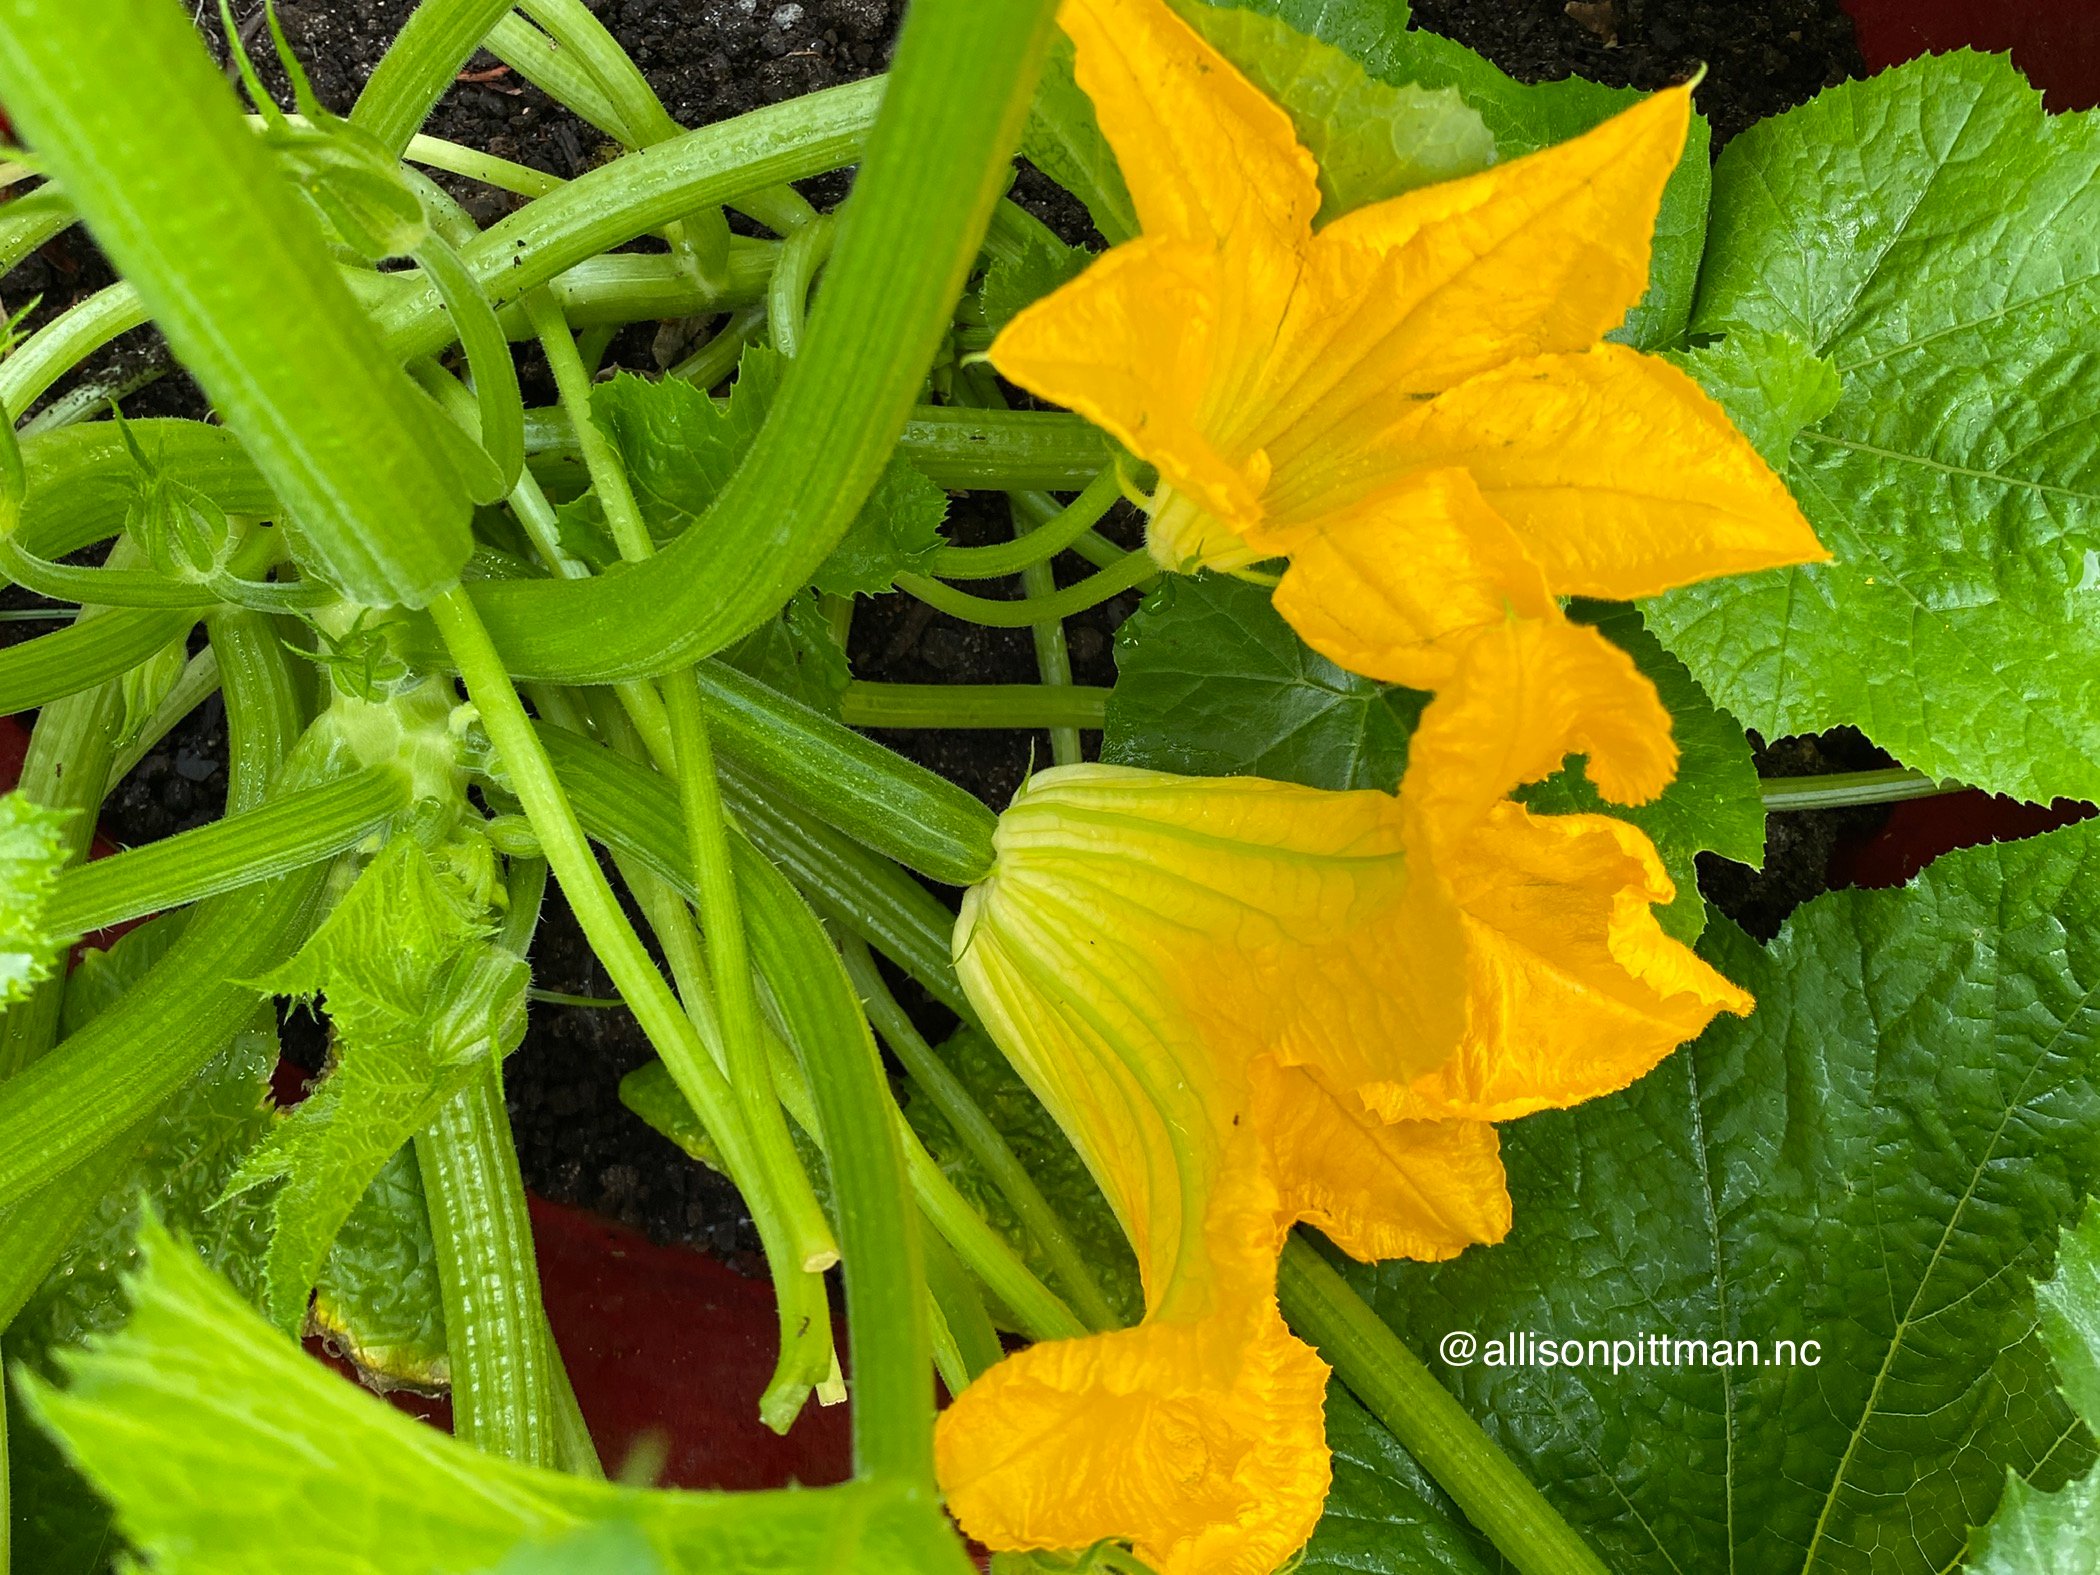 Zucchini plant showing female and male flowers